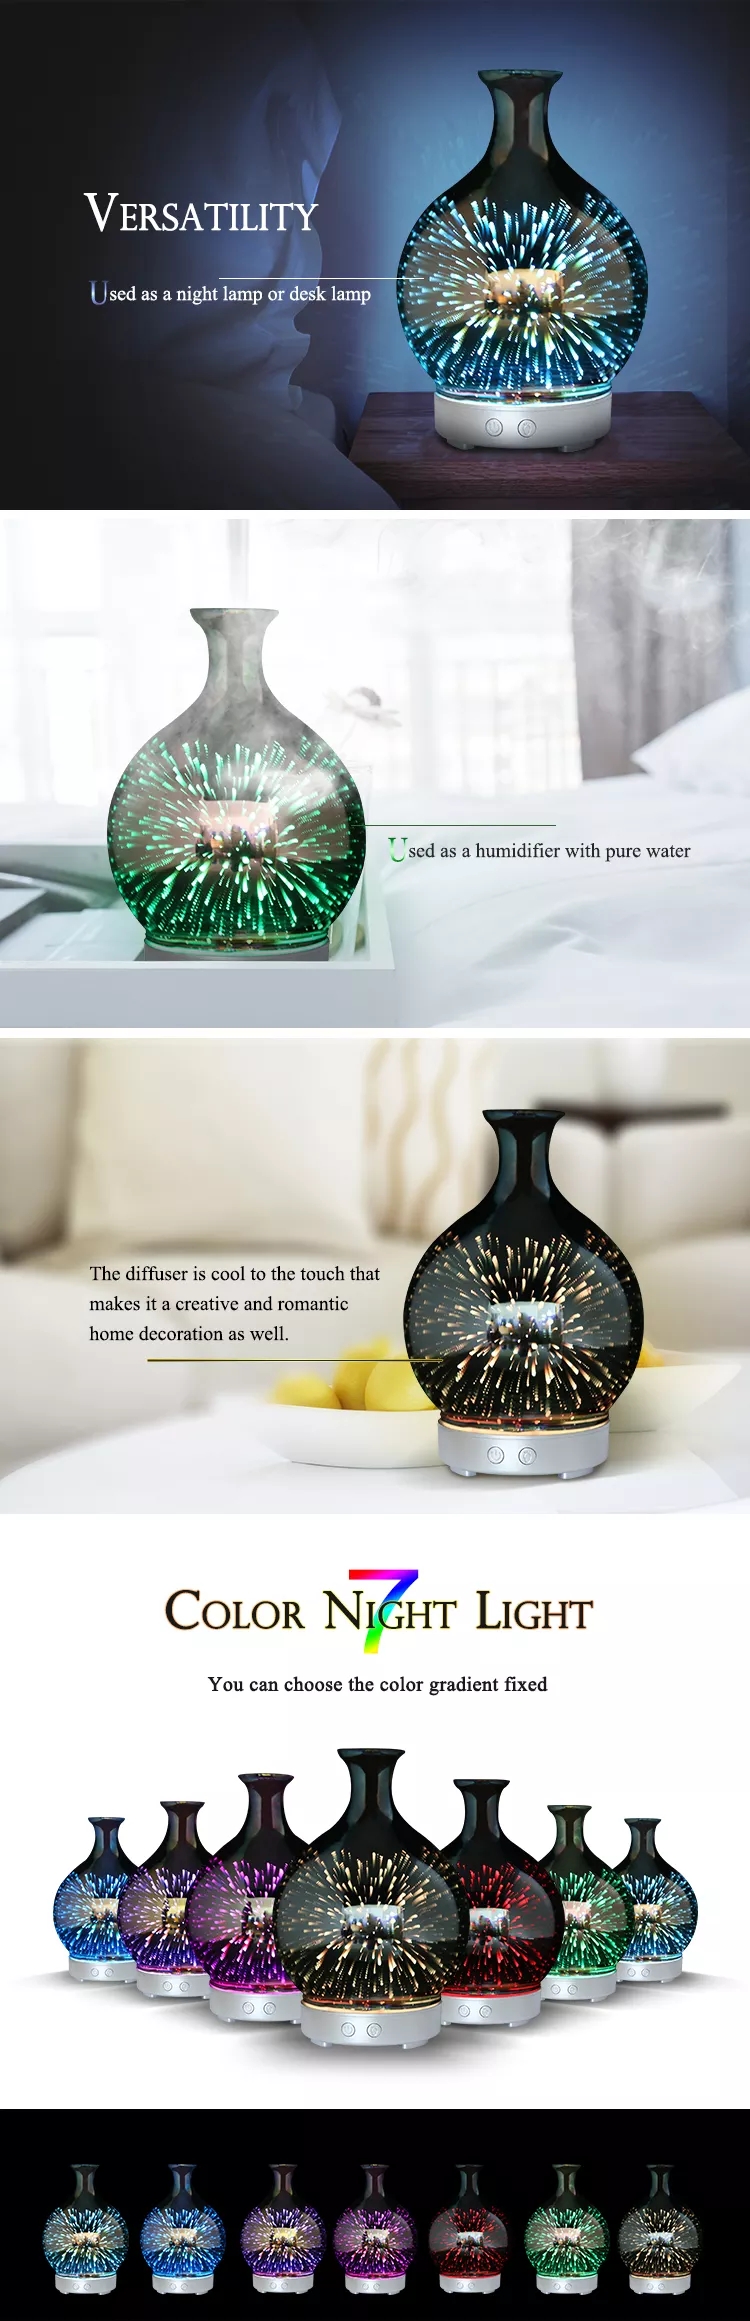 Air 100ml Glass Aroma Diffuser for Room